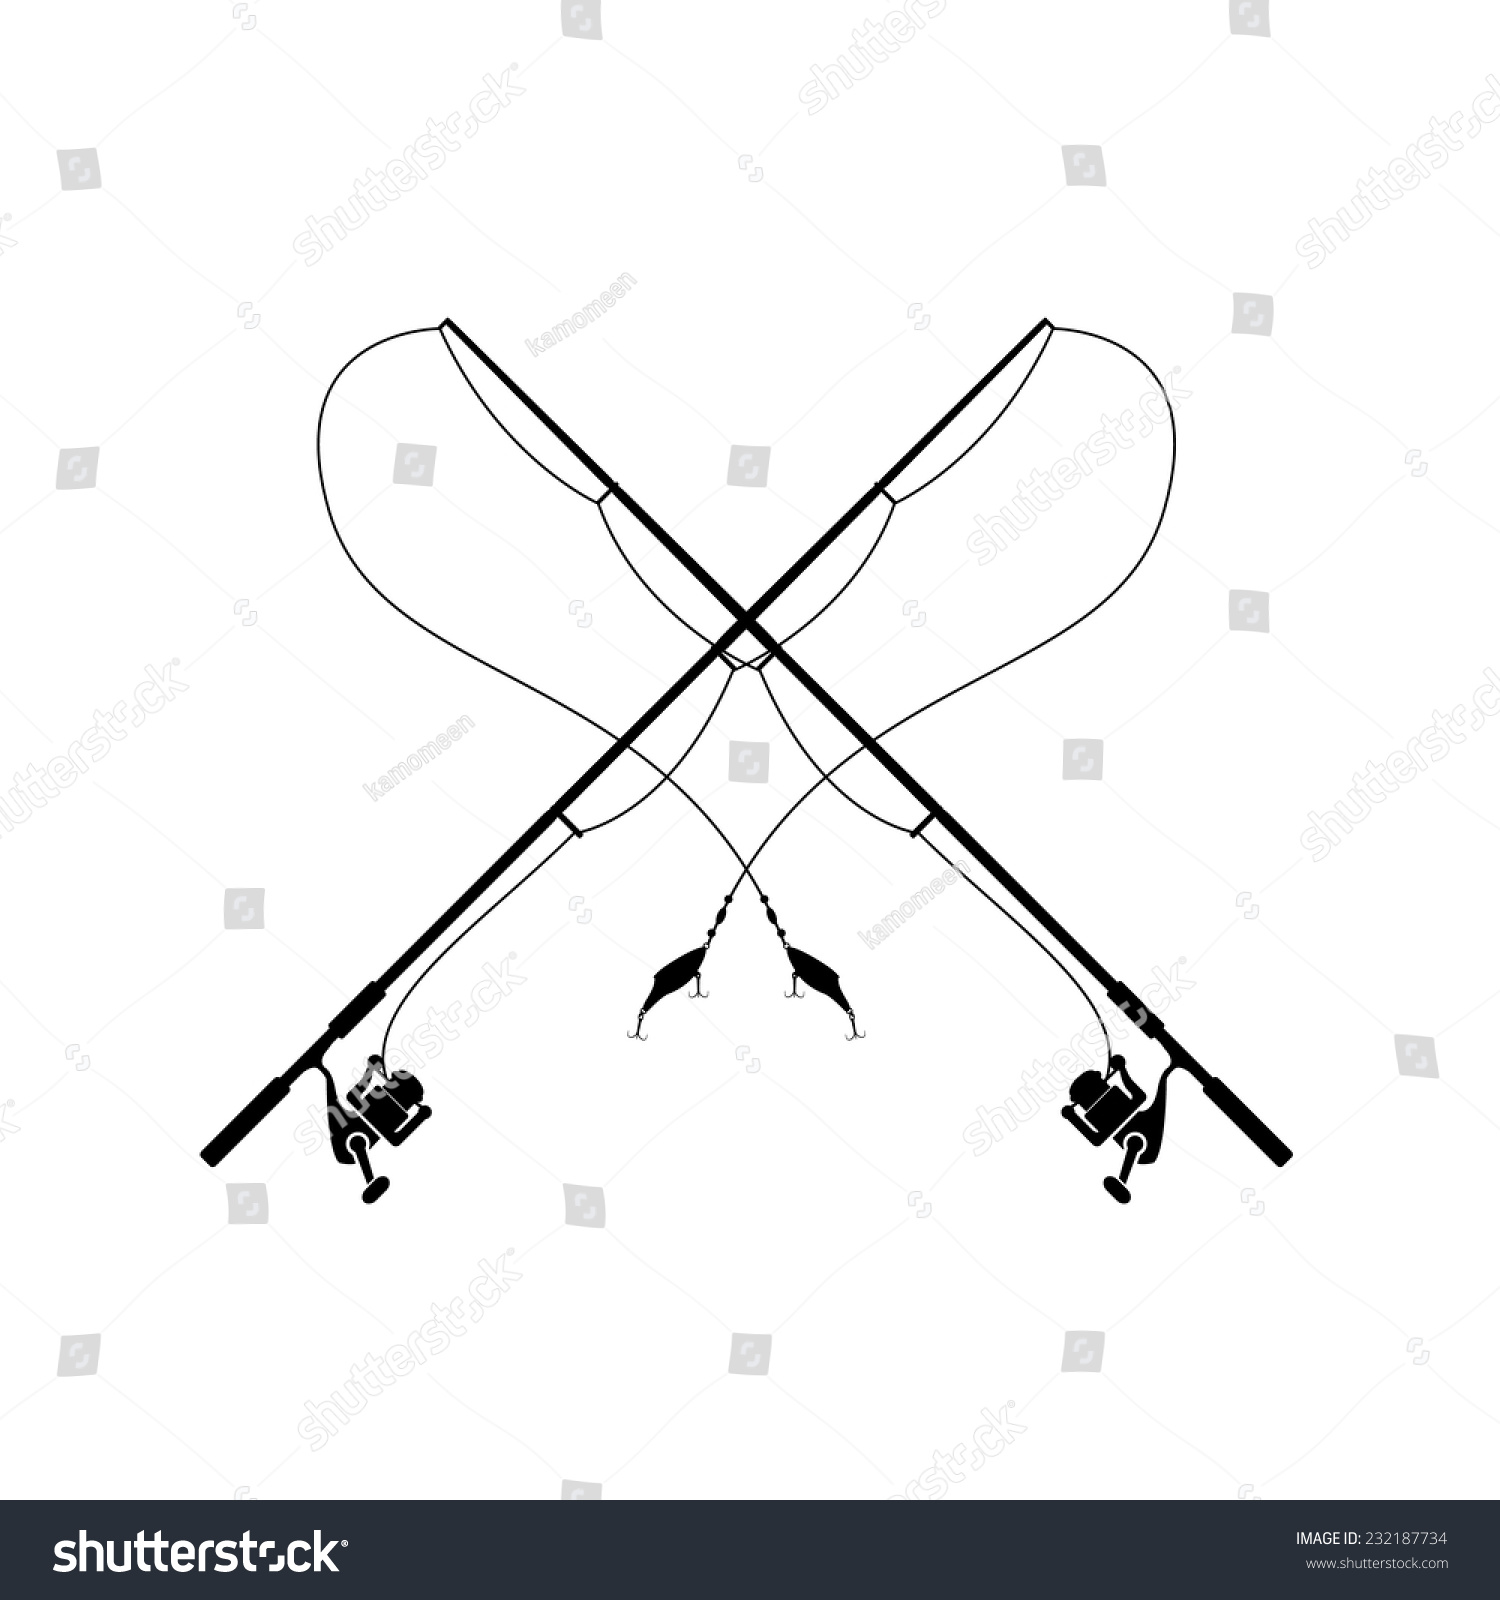 Download Isolated Fishing Rod Stock Vector 232187734 - Shutterstock